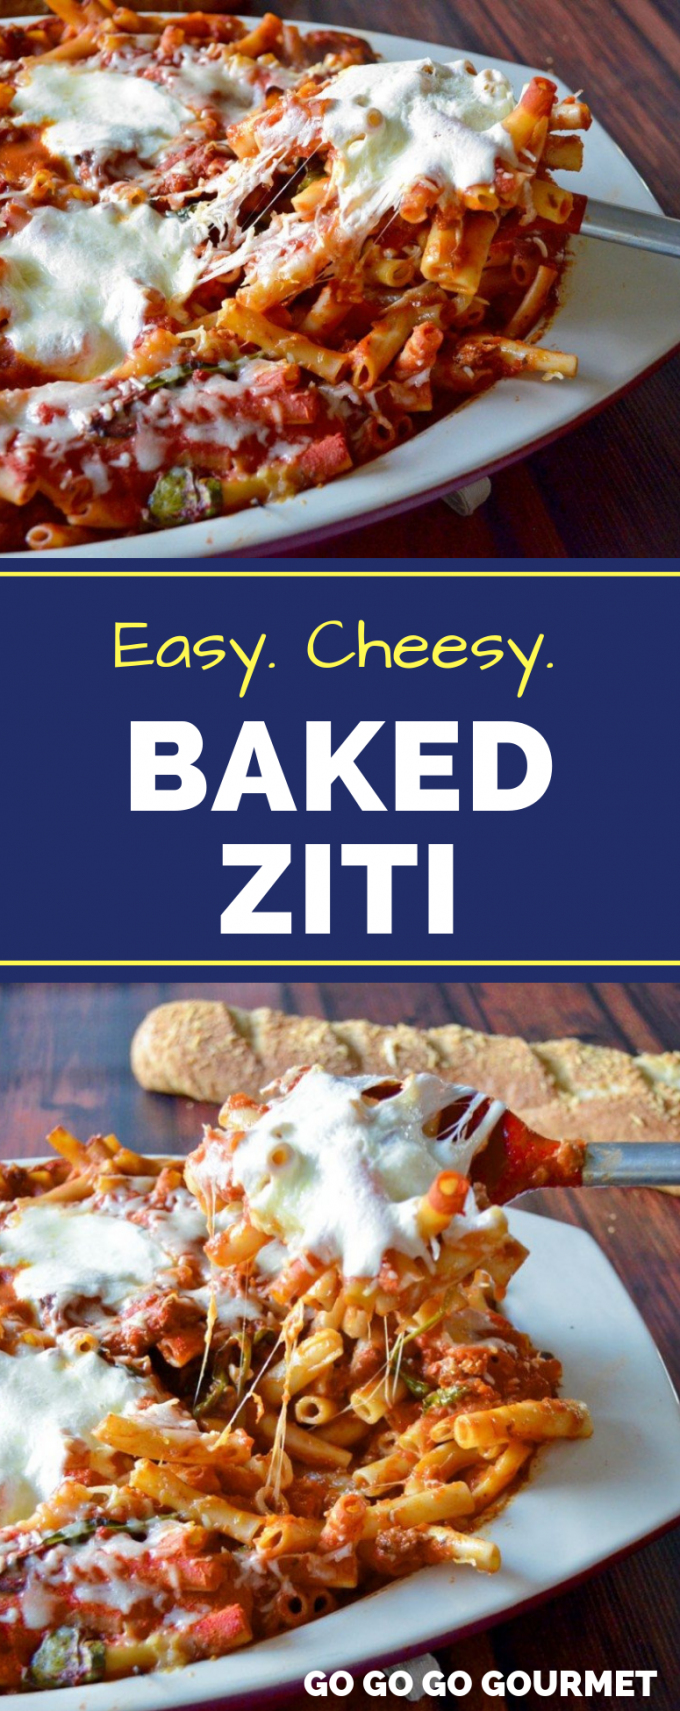 This easy Baked Ziti recipe with Italian sausage is even better than the Pioneer Woman recipe! You can easily double this recipe to make dinner for a crowd. It really is the best pasta recipe! #gogogogourmet #bakedziti #easypastarecipe #italiandinnerrecipes via @gogogogourmet